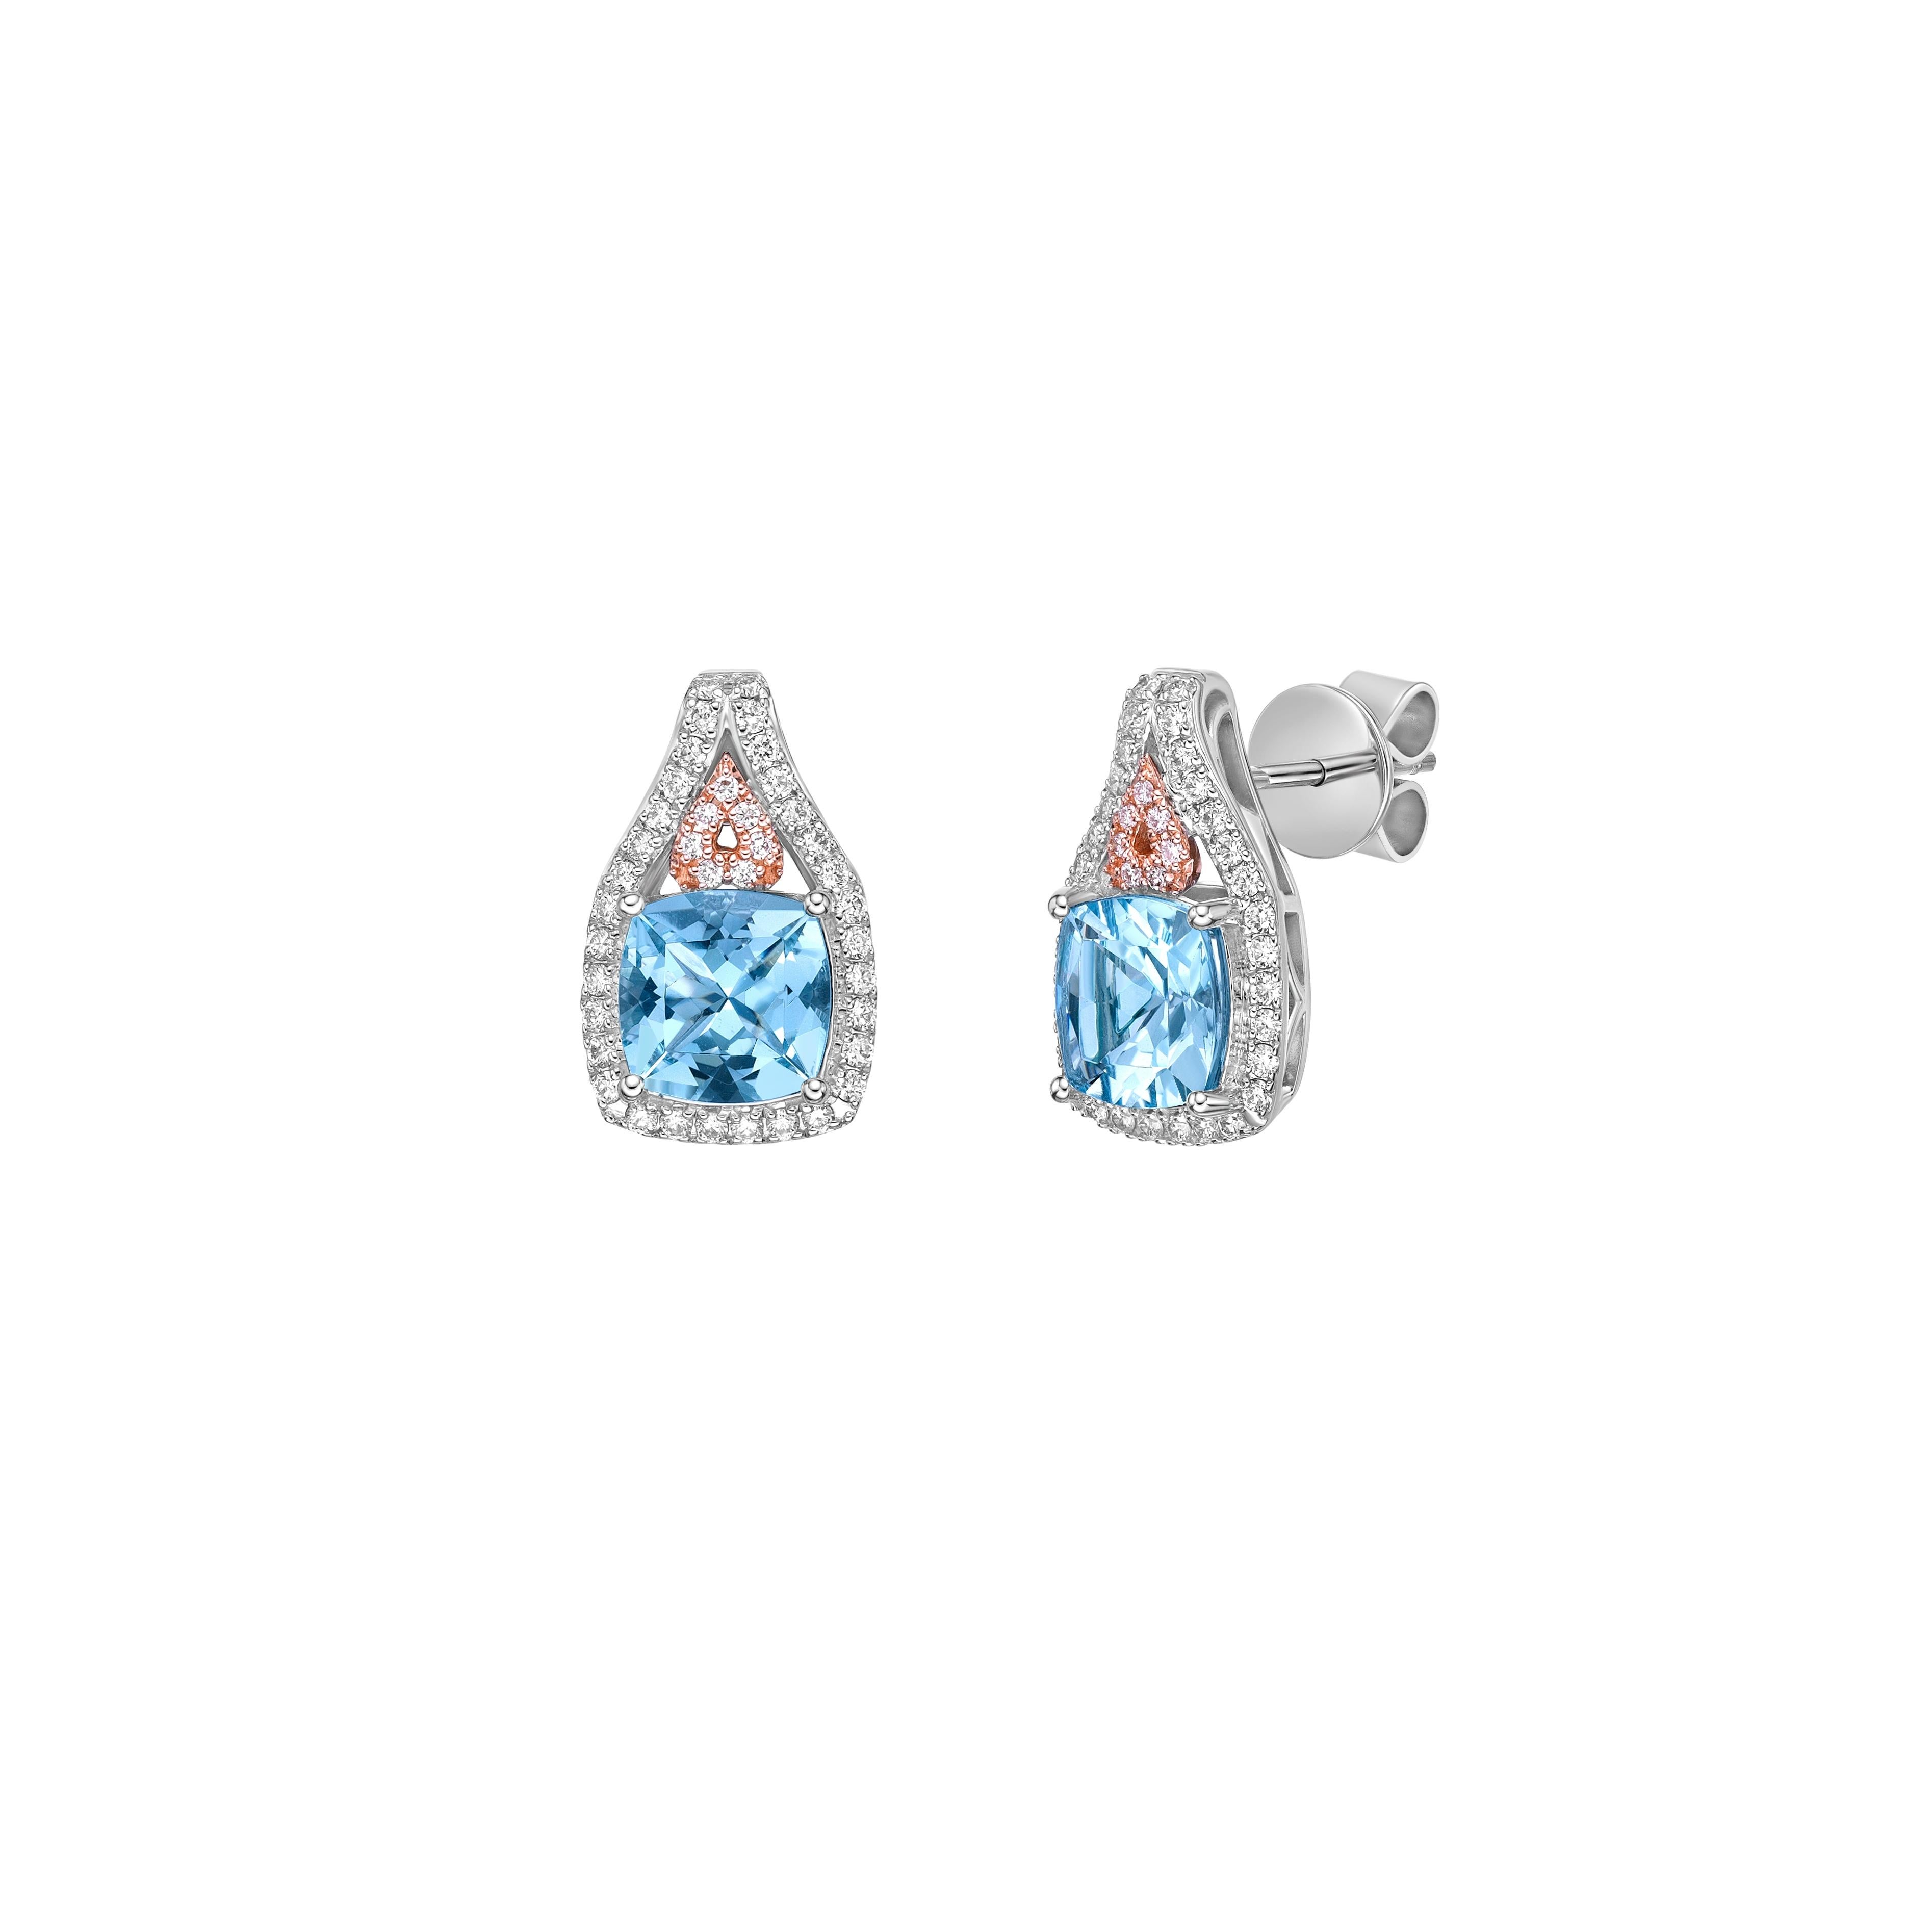 This collection features an array of Aquamarines with an icy blue hue that is as cool as it gets! Accented with Diamonds these Stud Earrings are made in White Rose Gold and present a classic yet elegant look.

Aquamarine Stud Earring in 18Karat